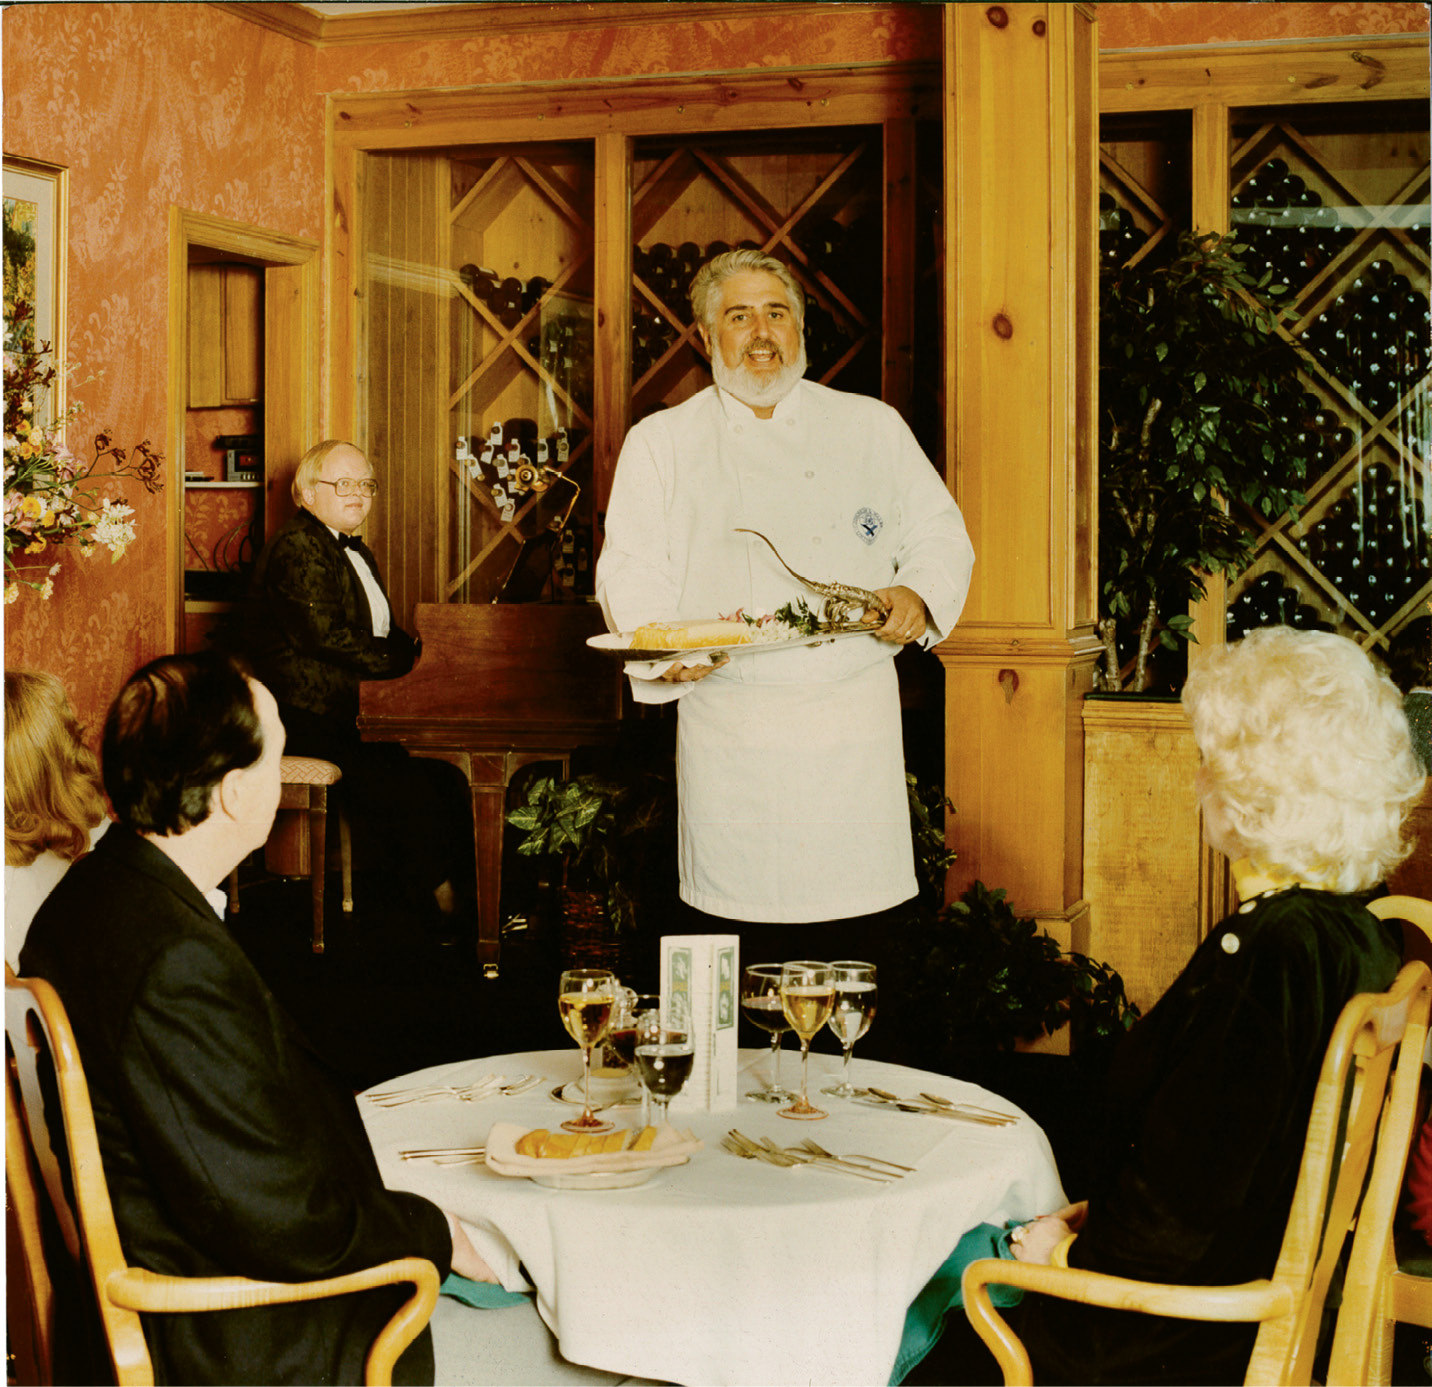 At Robert’s of Charleston, “Singing Chef” Robert Dickson combined two of his considerable talents: operatic singing and haute cuisine.